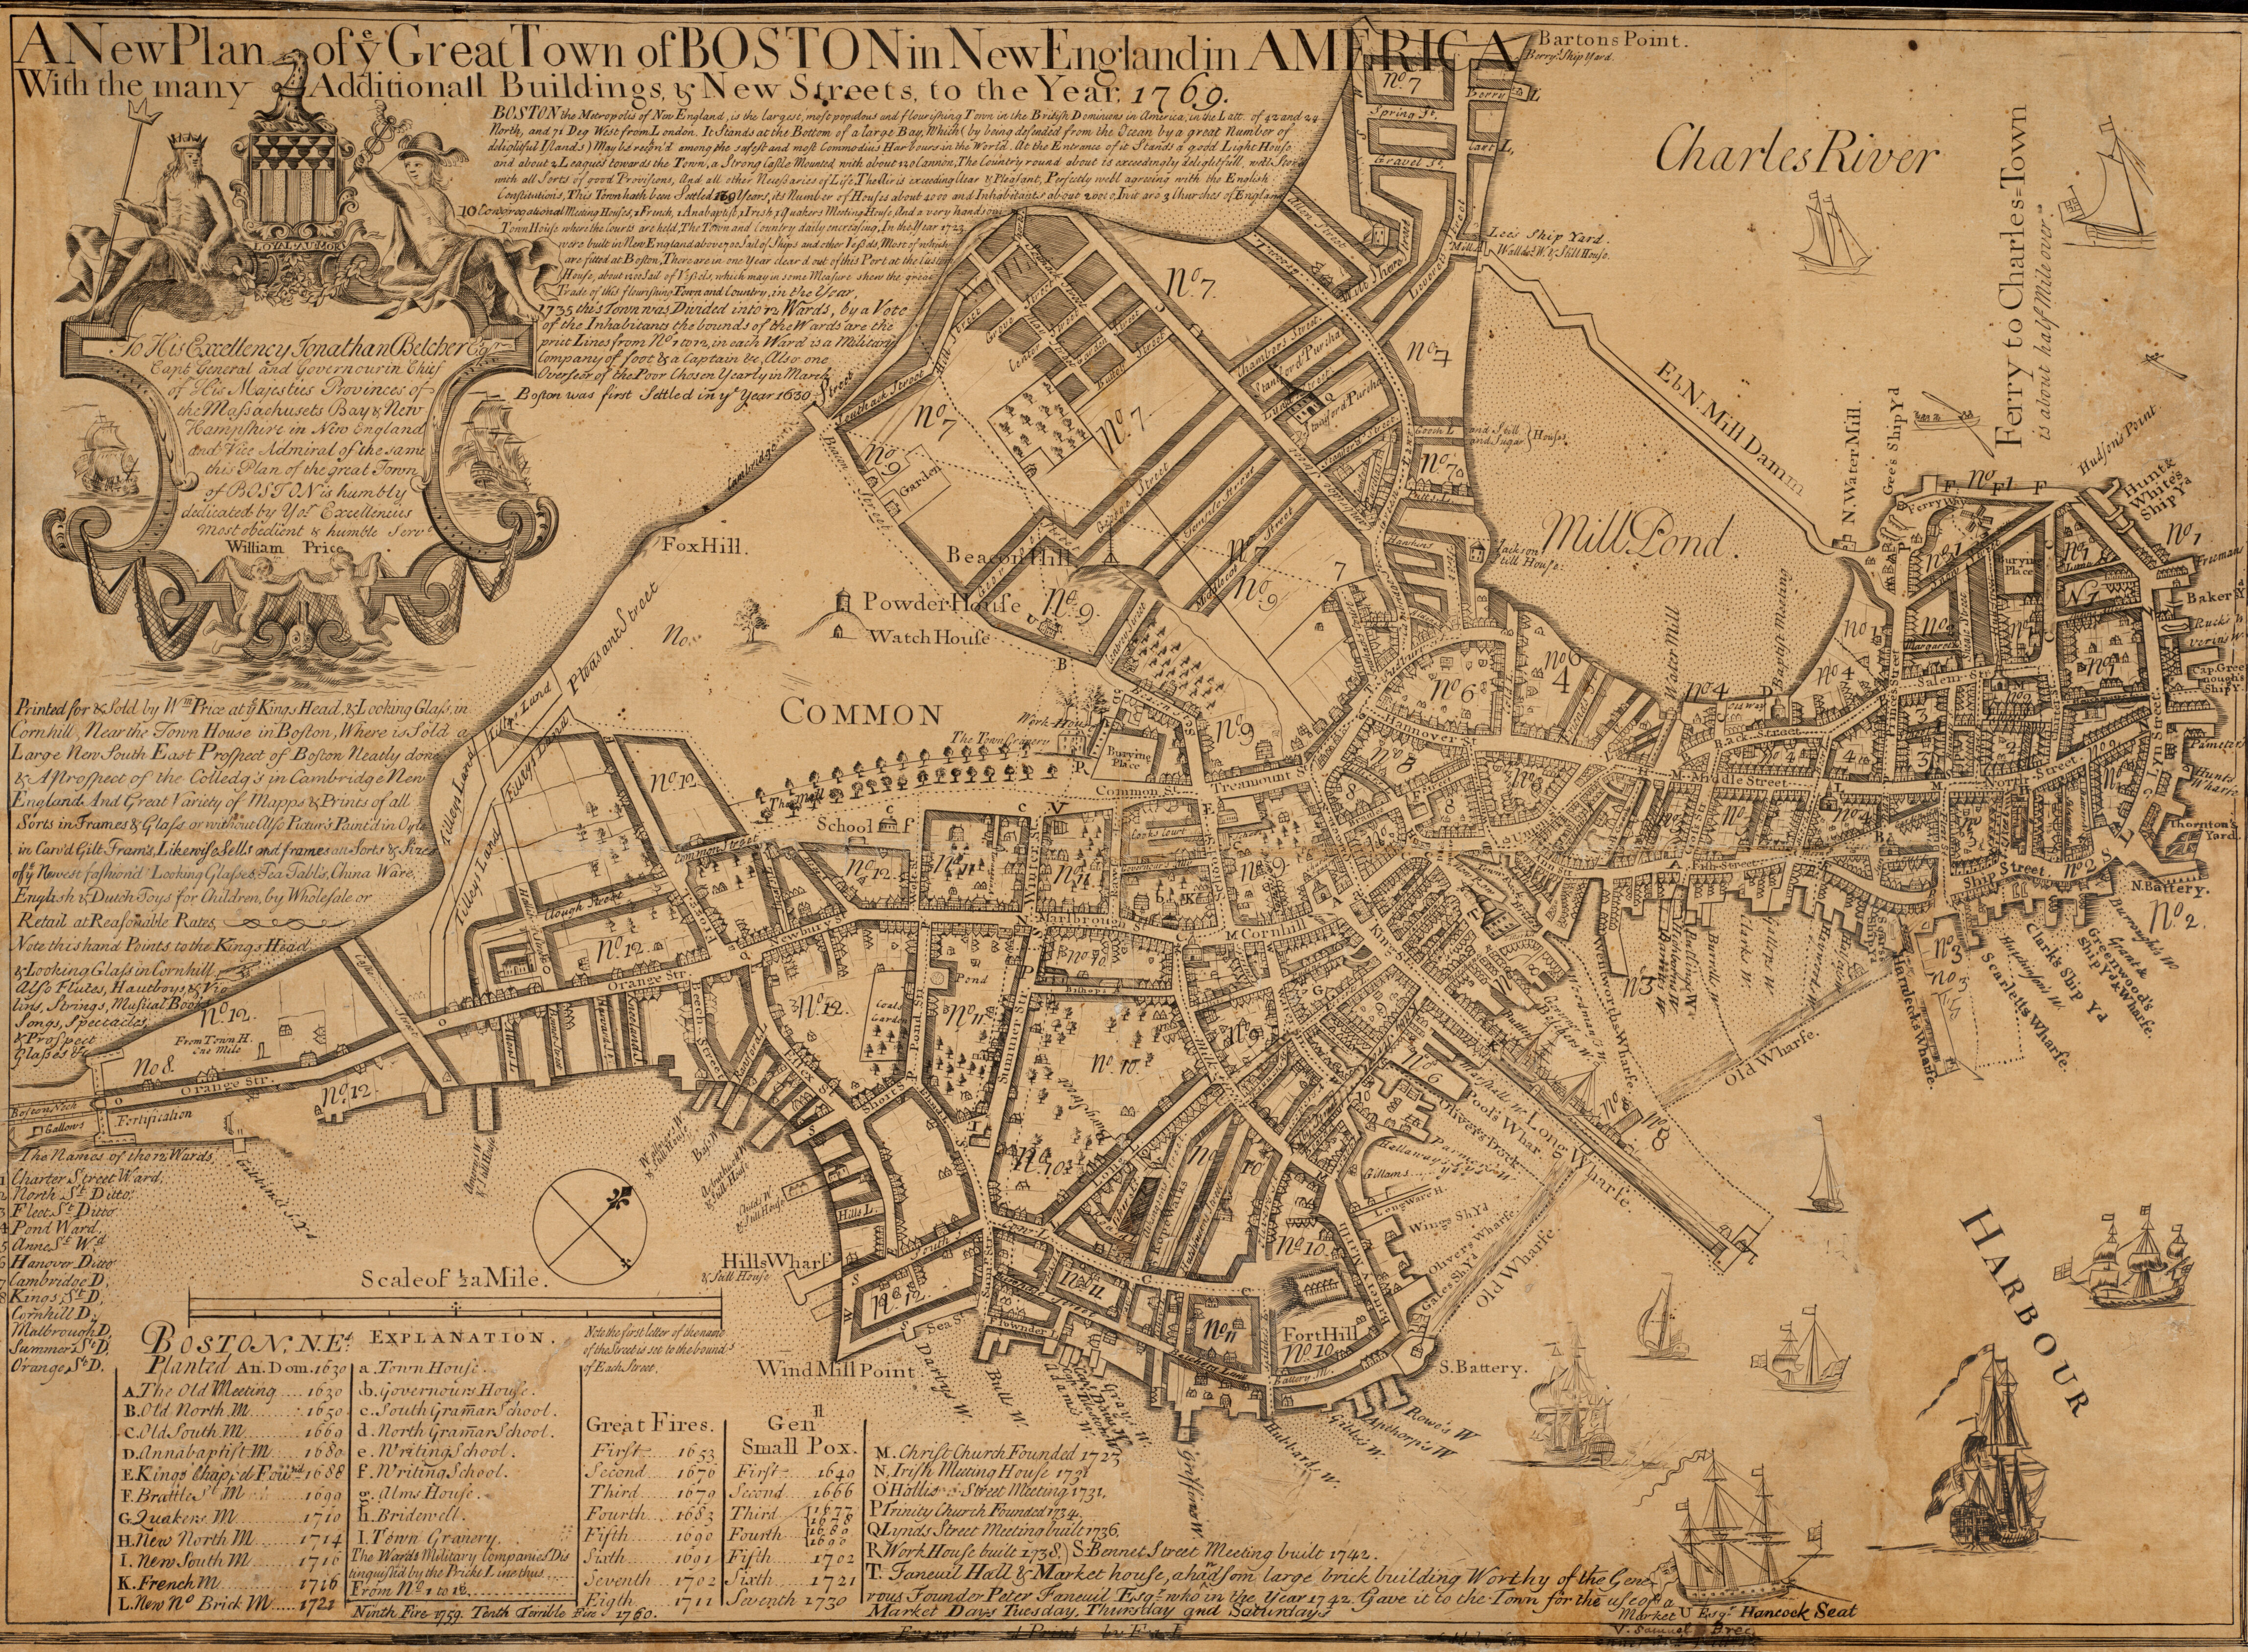 A map showing the city of Boston in 1769, on which are labeled various city streets, important landmarks, churches, docks & wharves, military fortifications, among others.